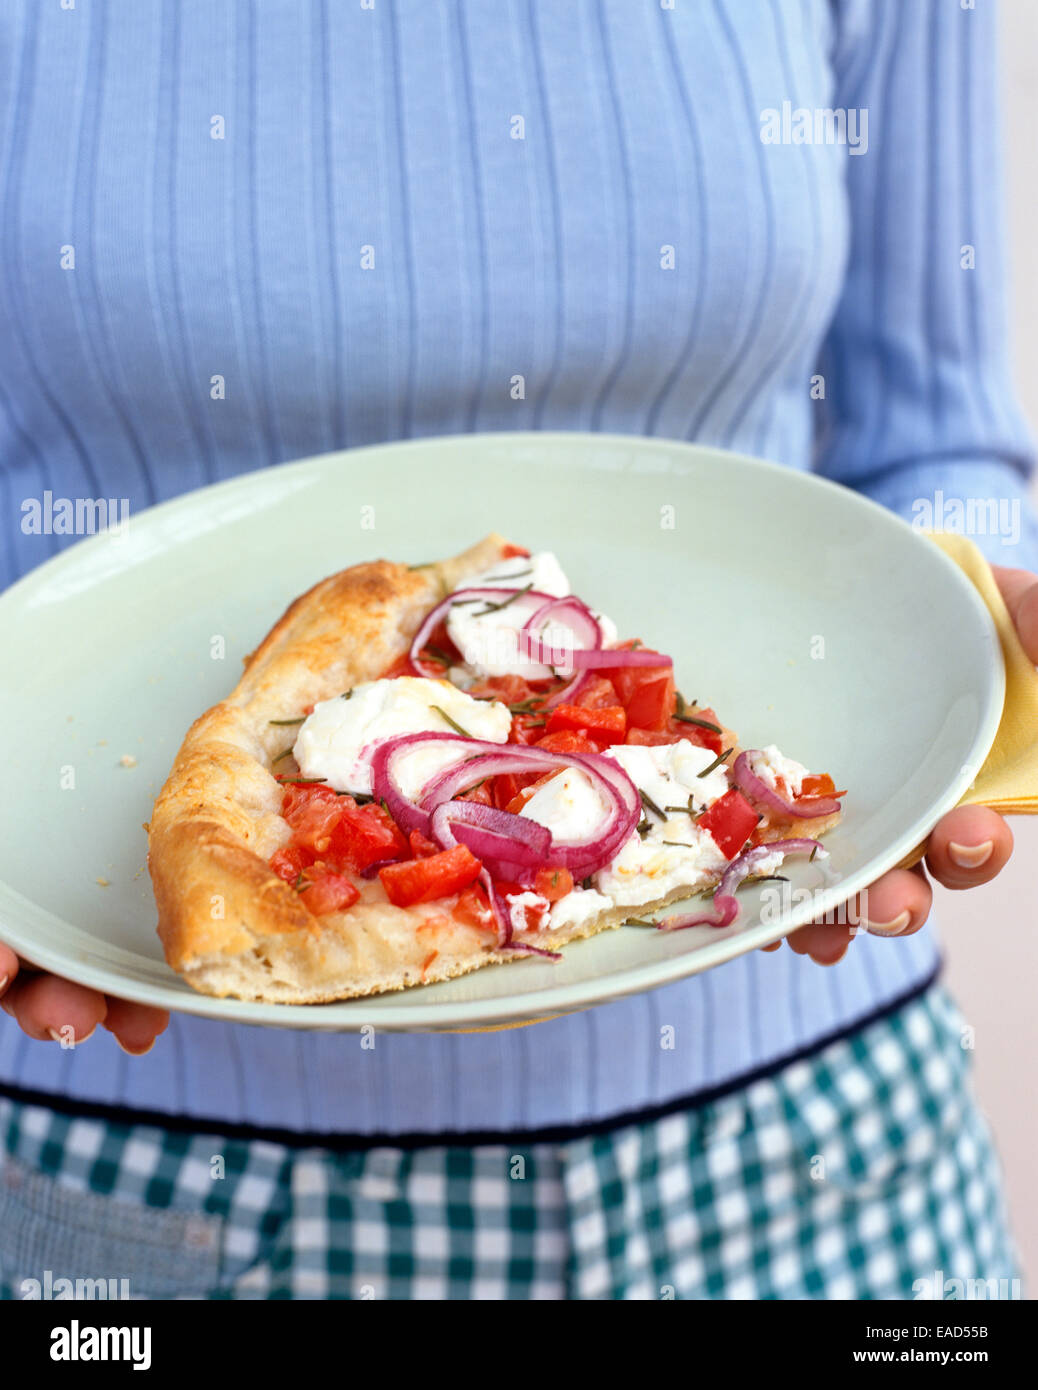 woman holding plated pizza slice Stock Photo